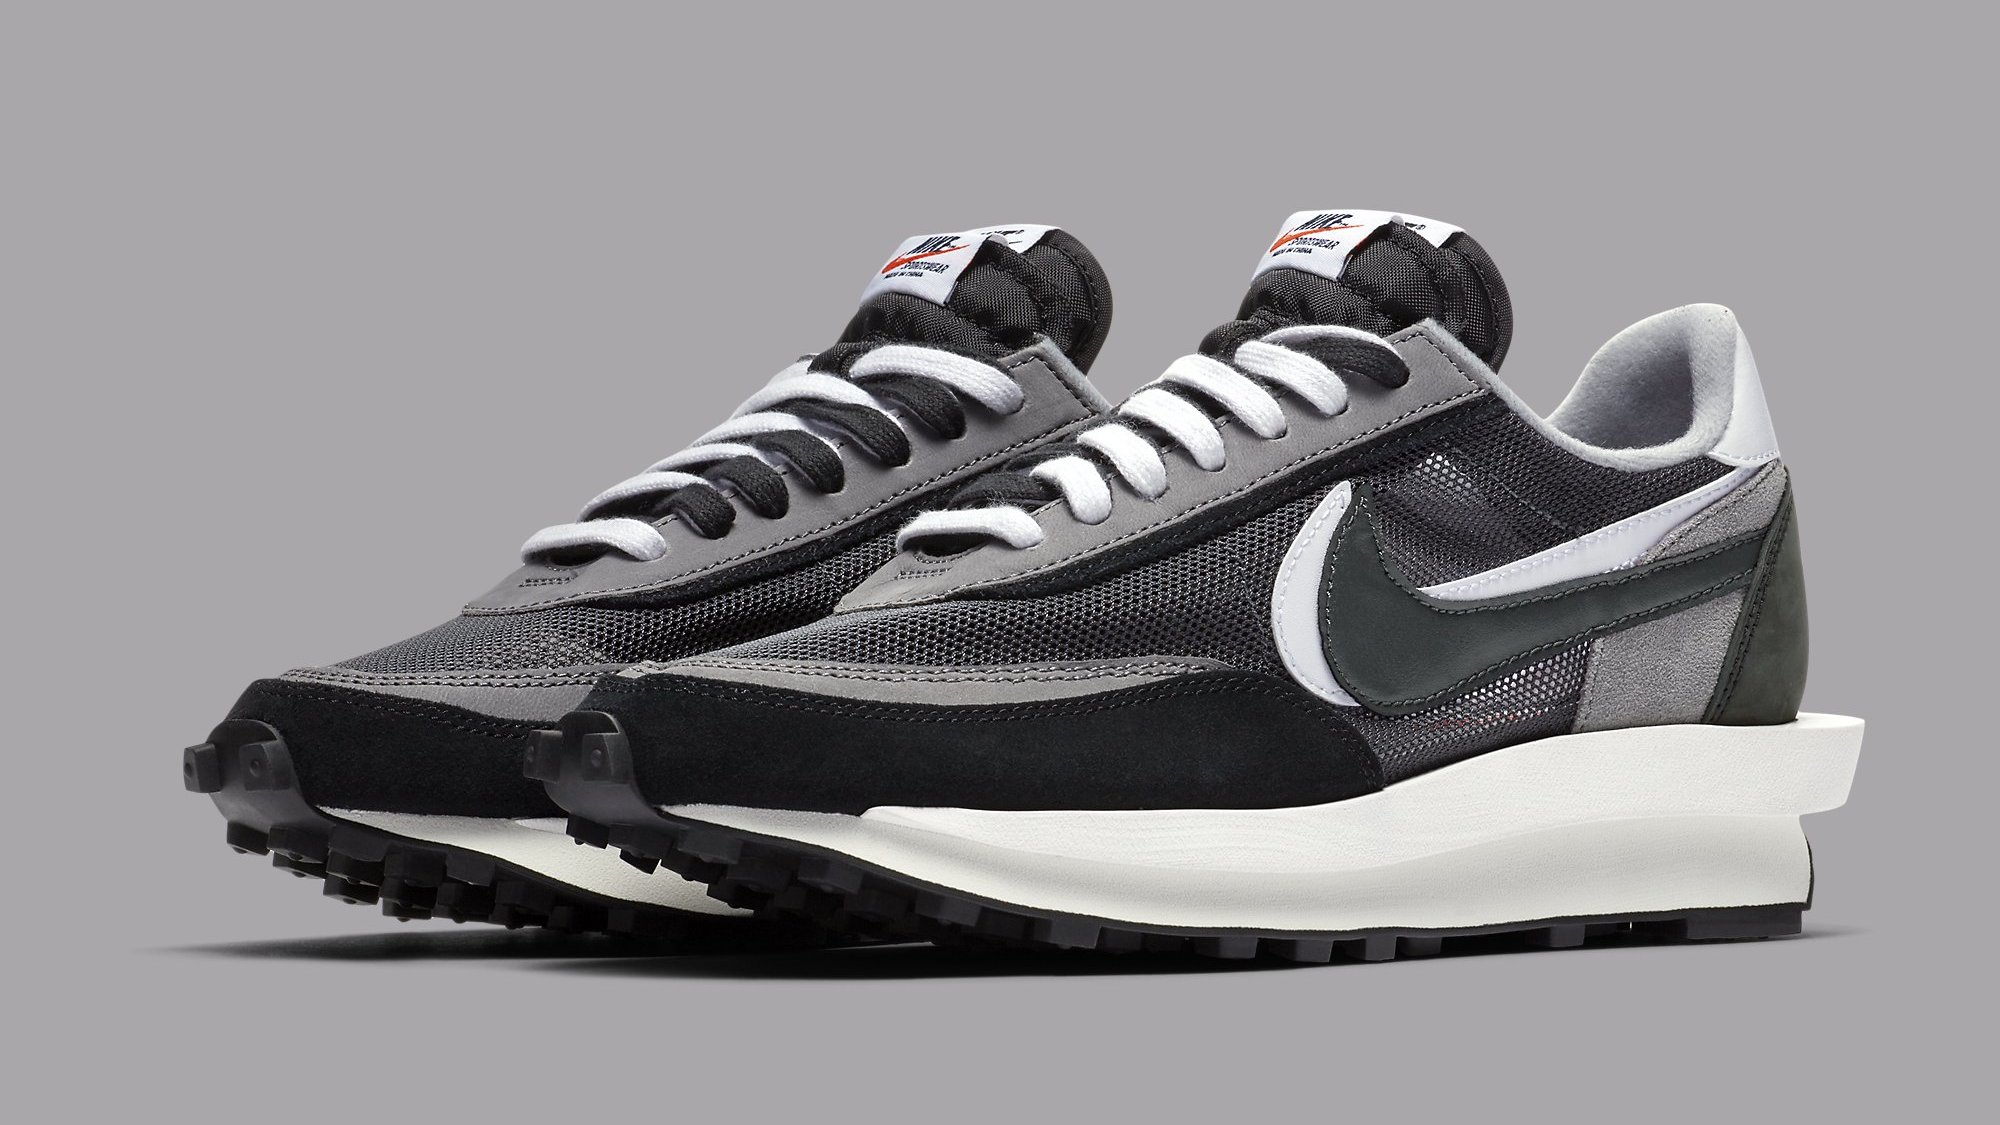 Sacai x Nike LDWaffles Releasing in Black and White   Complex